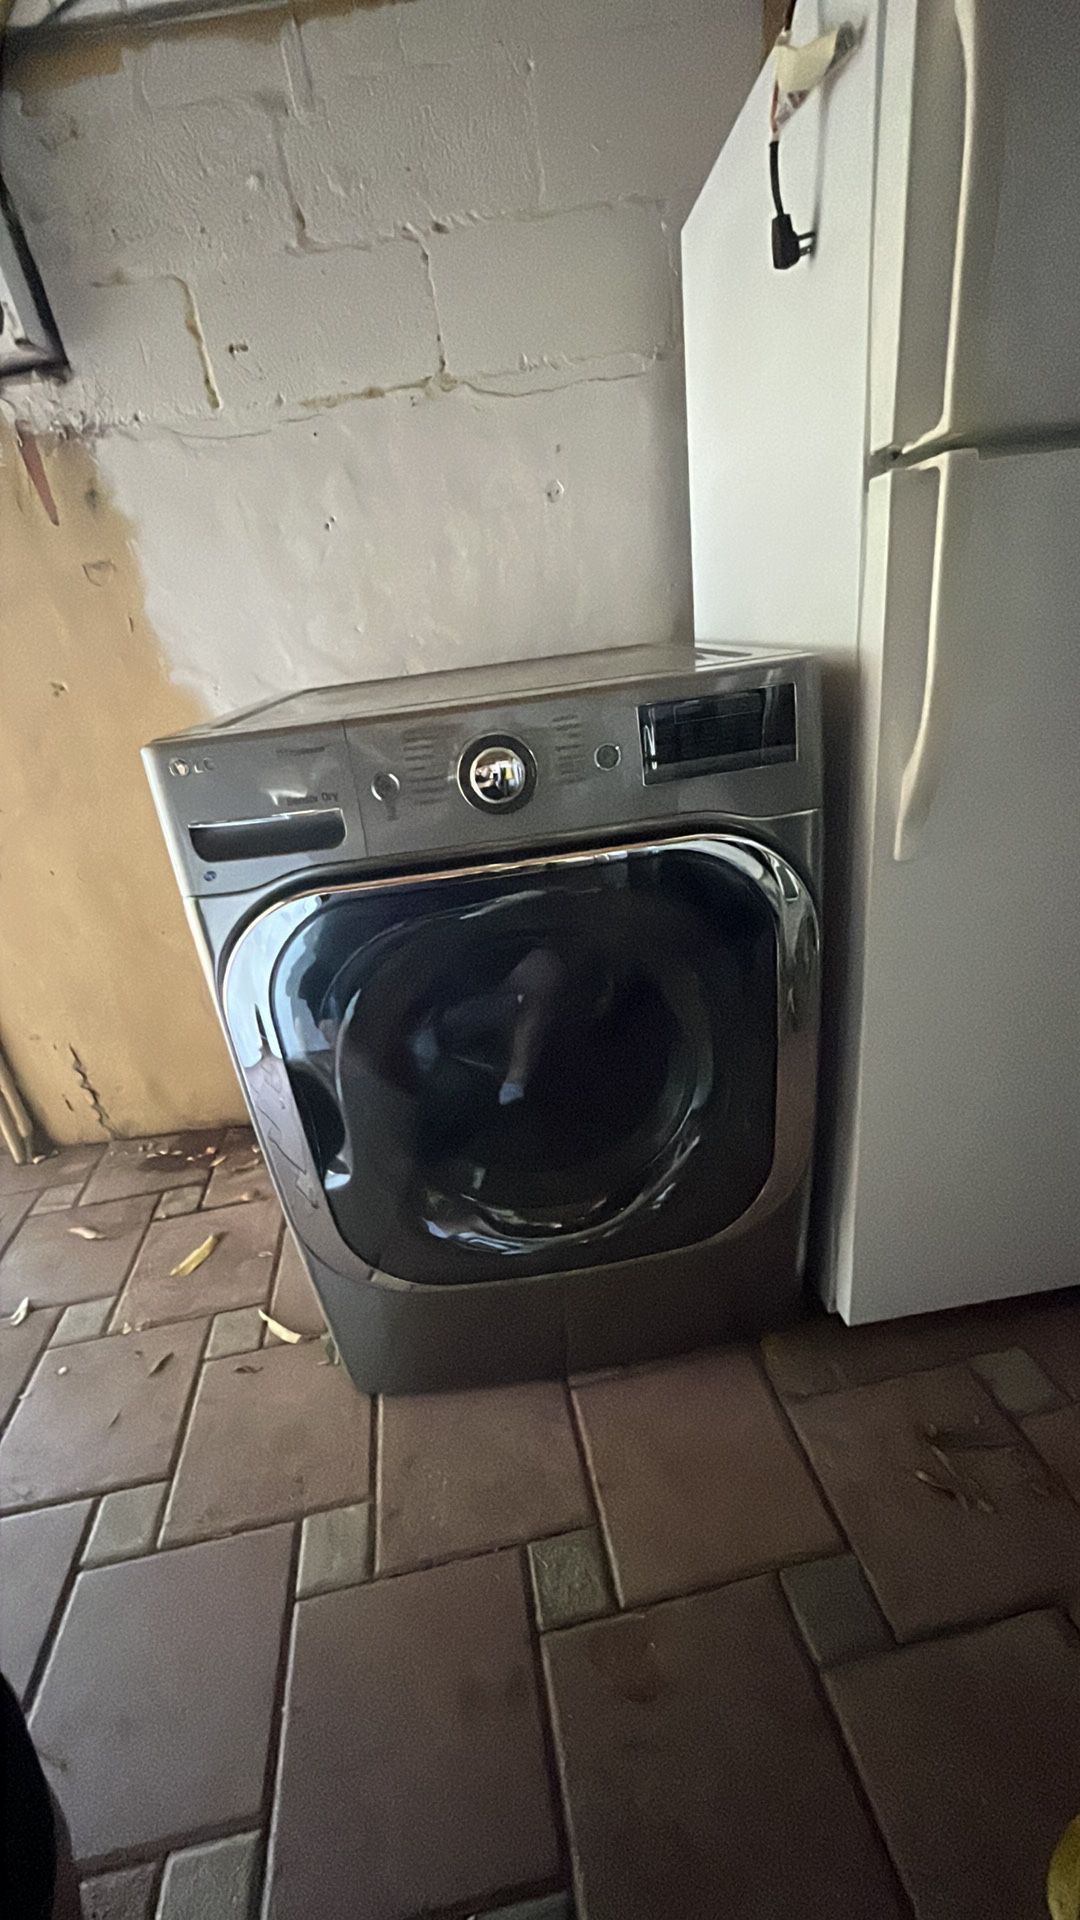 Real Nice Dryer Works For Route. Come Check It Out.